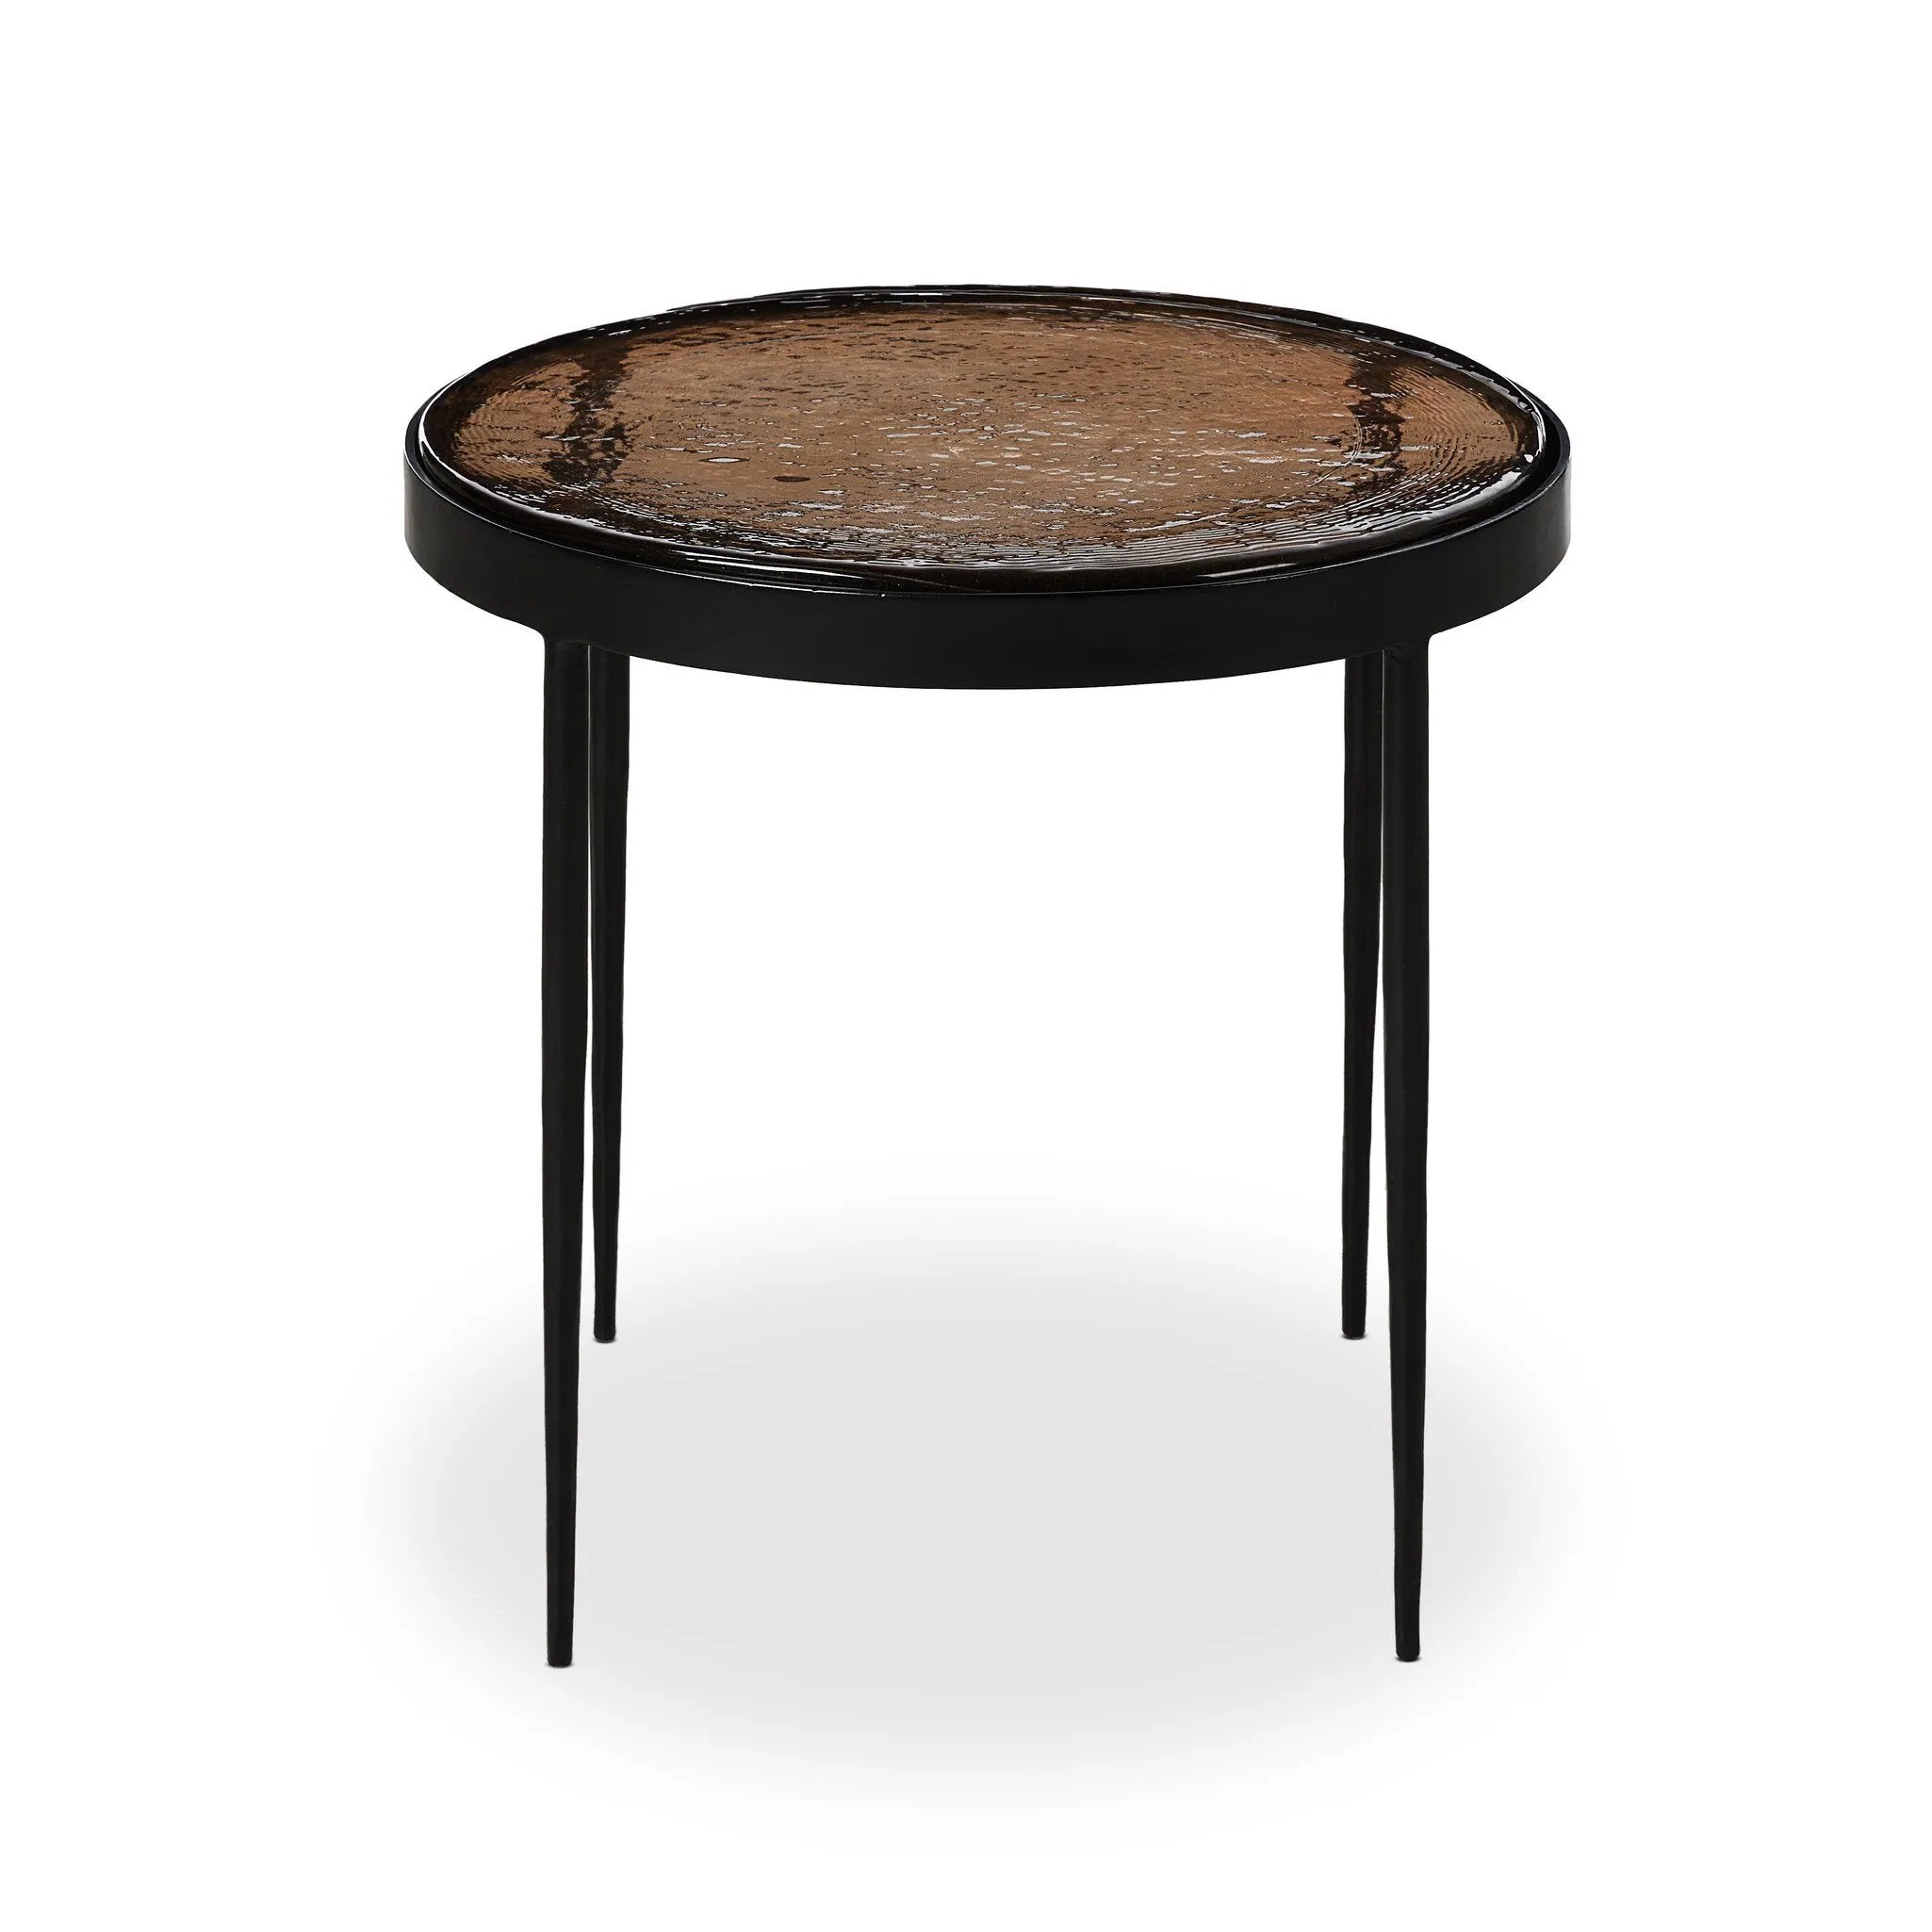 Smoky brown glass-topped table with slim, tapered matte black metal frames for a sleek, modern look. Part of a nesting set, can be used alone or paired with its larger counterpart.Collection: Marlo Amethyst Home provides interior design, new home construction design consulting, vintage area rugs, and lighting in the Houston metro area.